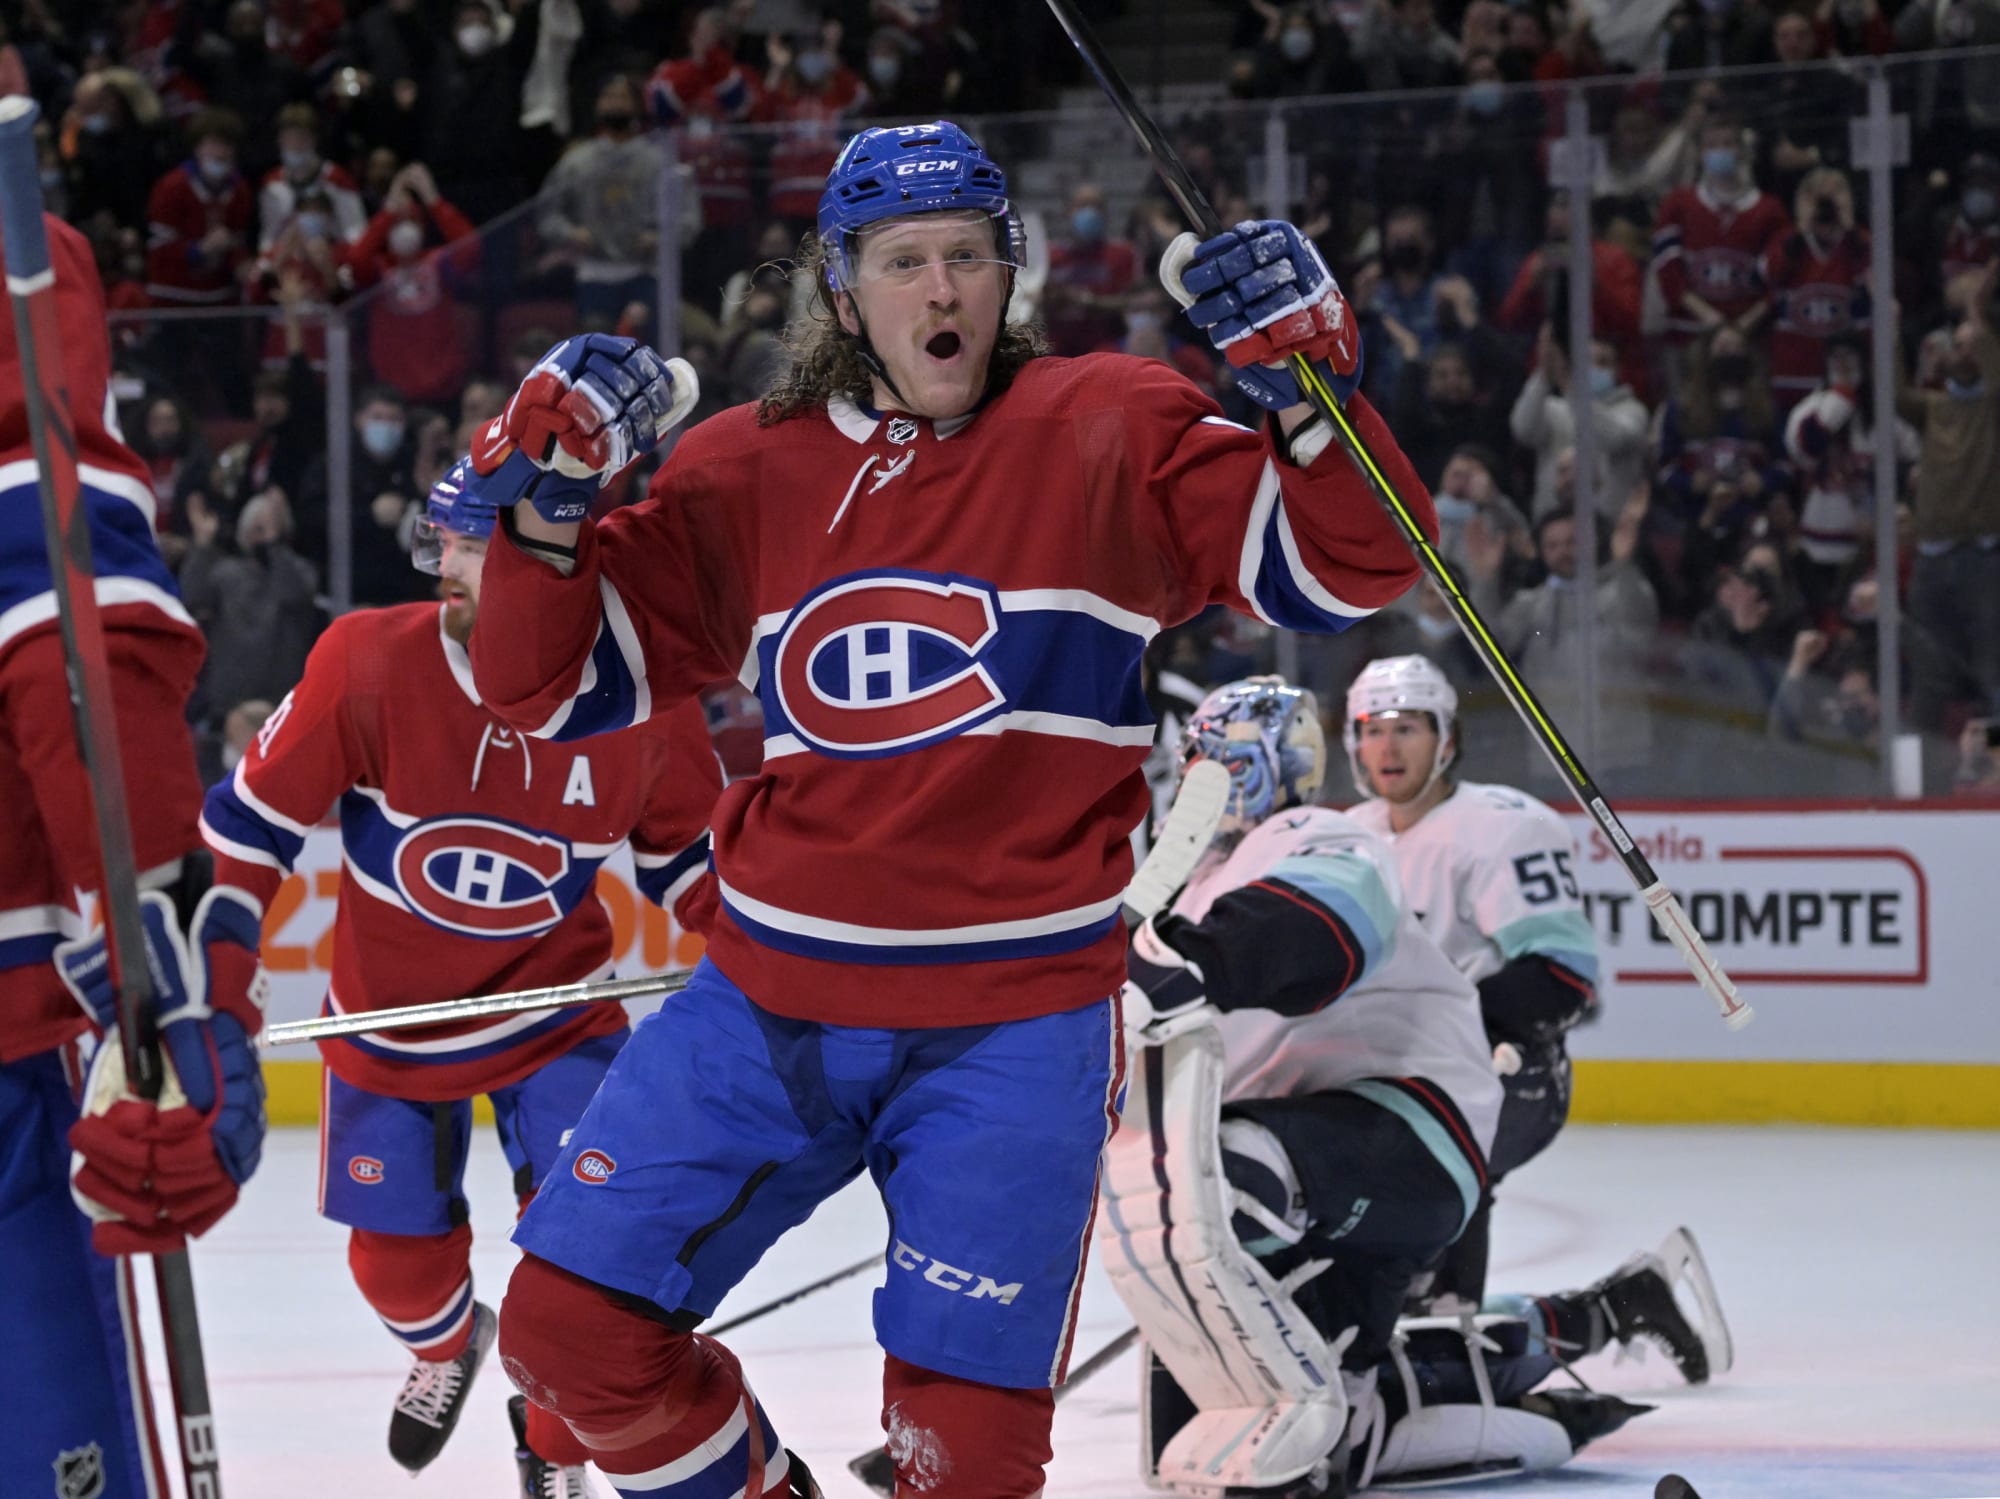 Montreal Canadiens sign Schueneman to one-year contract